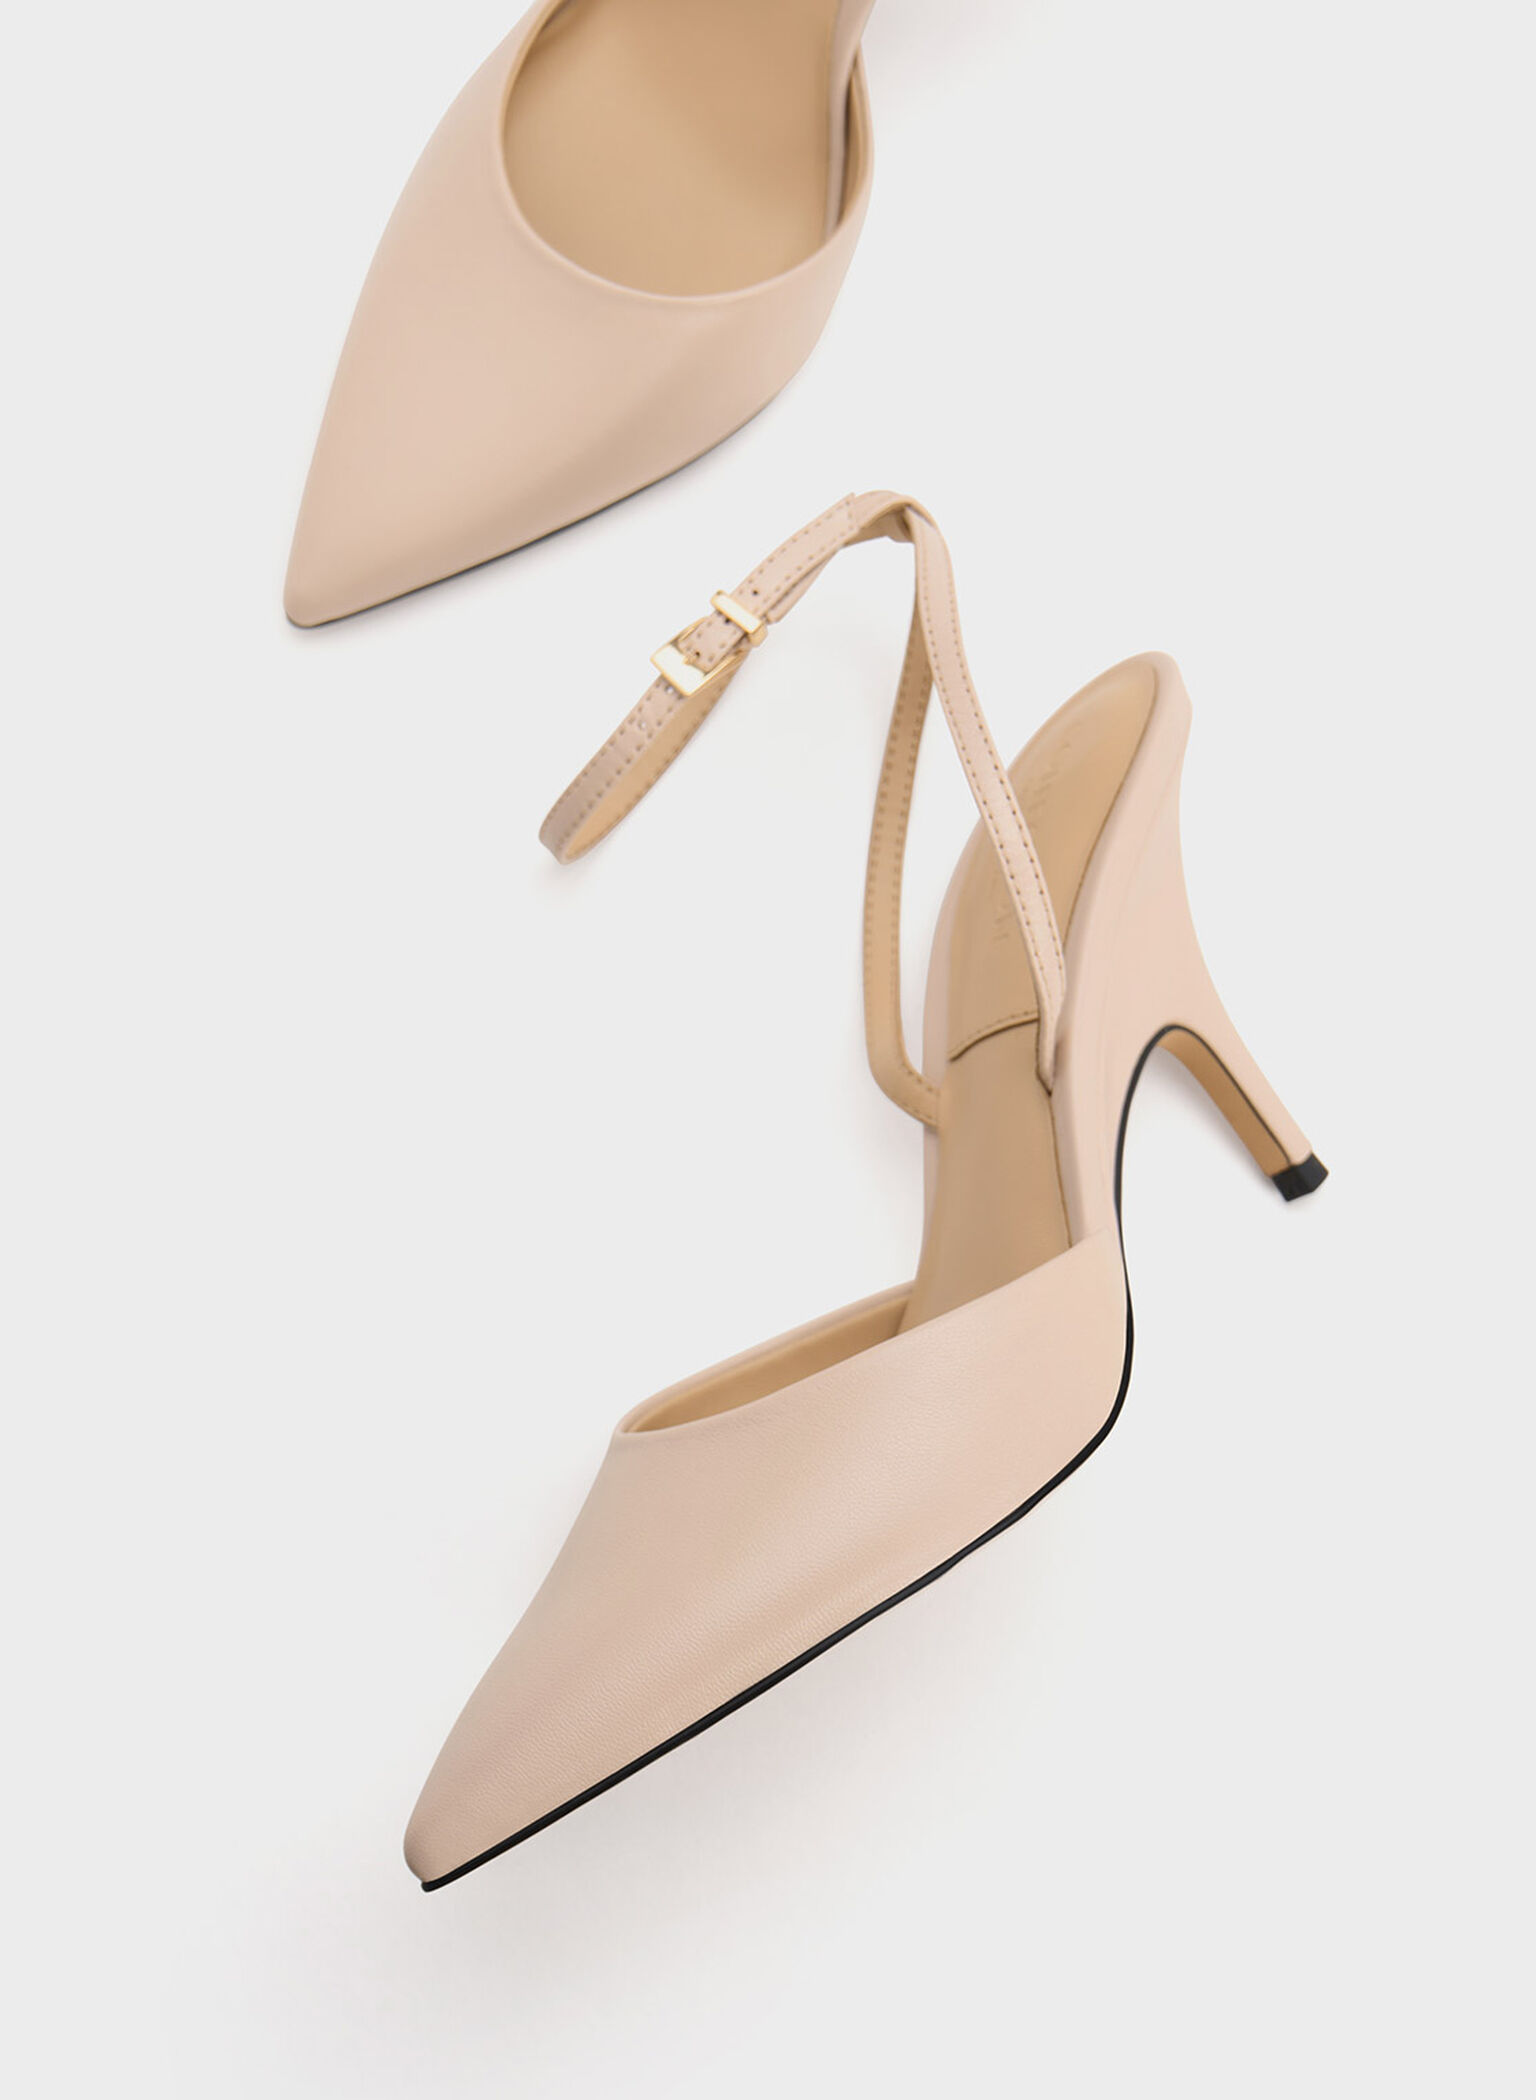 Leather Ankle Strap Pumps, Nude, hi-res